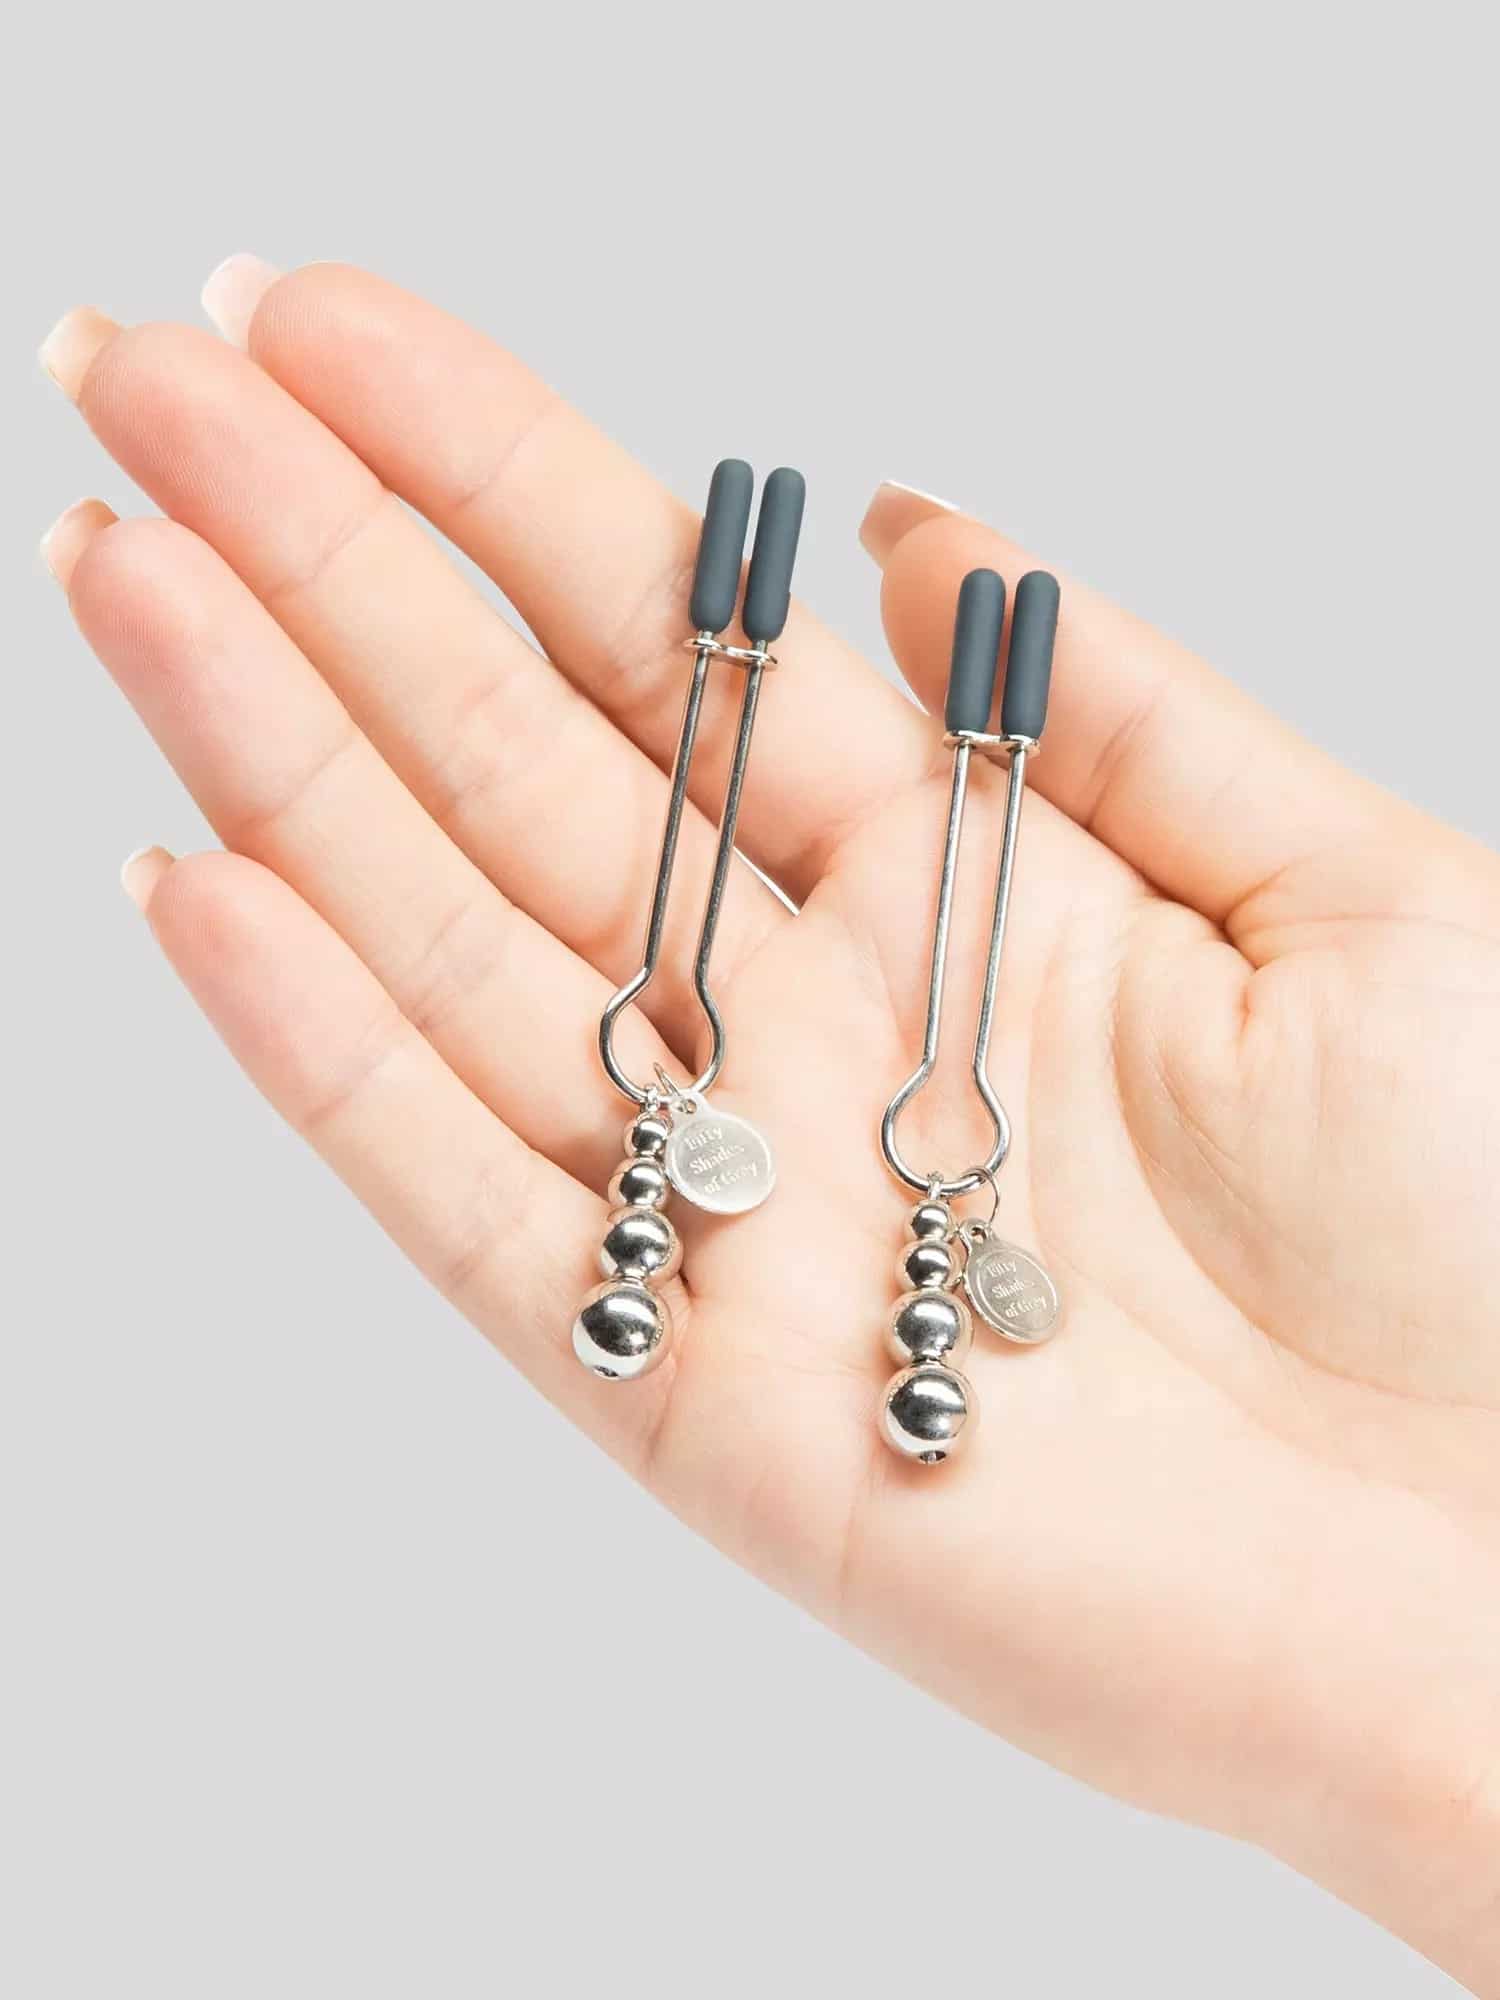 Fifty Shades of Grey The Pinch Adjustable Nipple Clamps. Slide 14